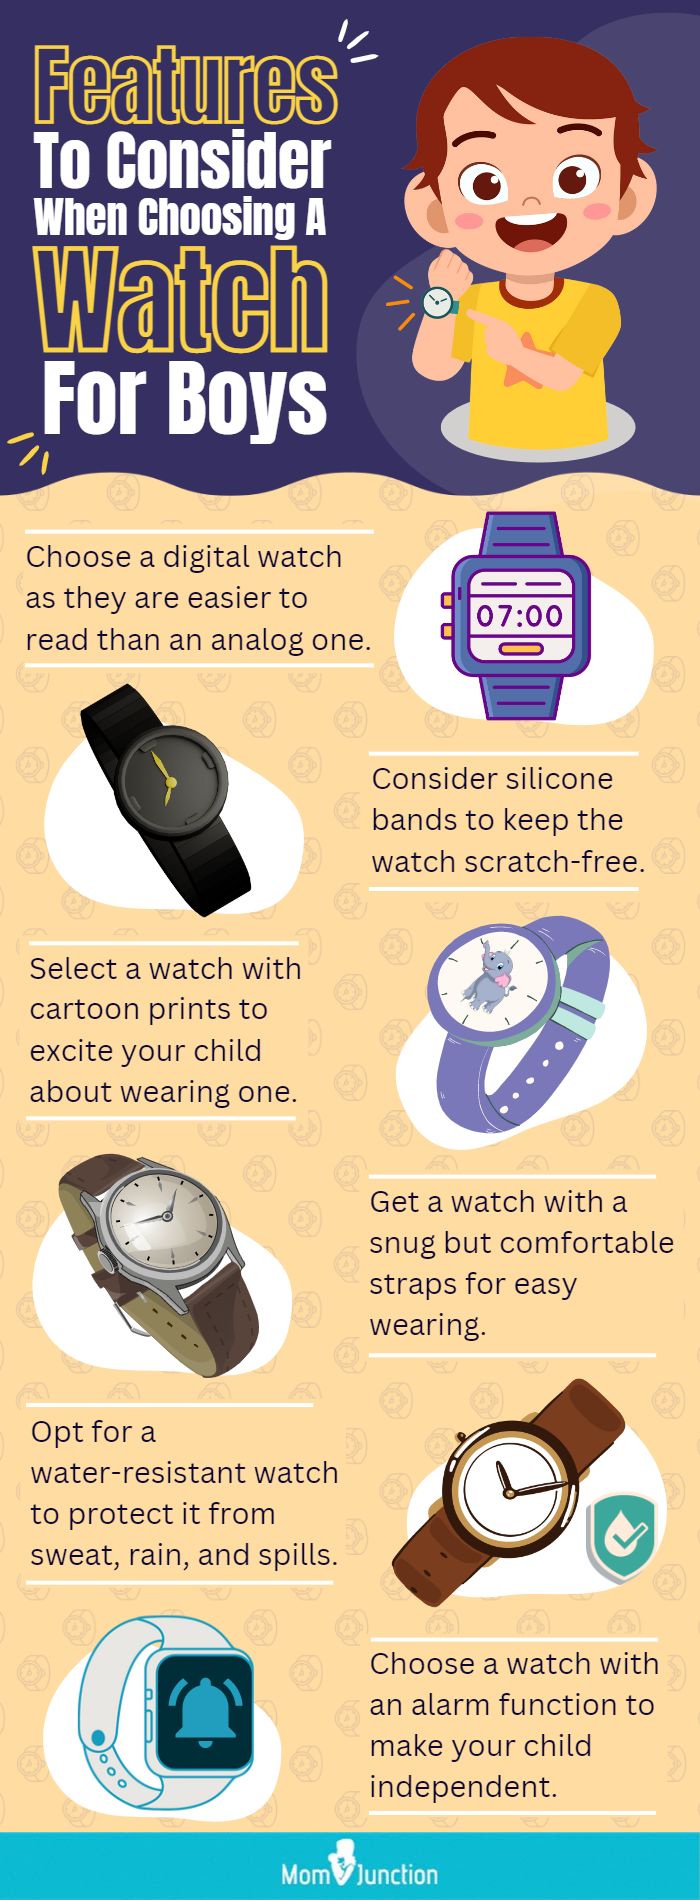 Features To Consider When Choosing A Watch For Boys (infographic)